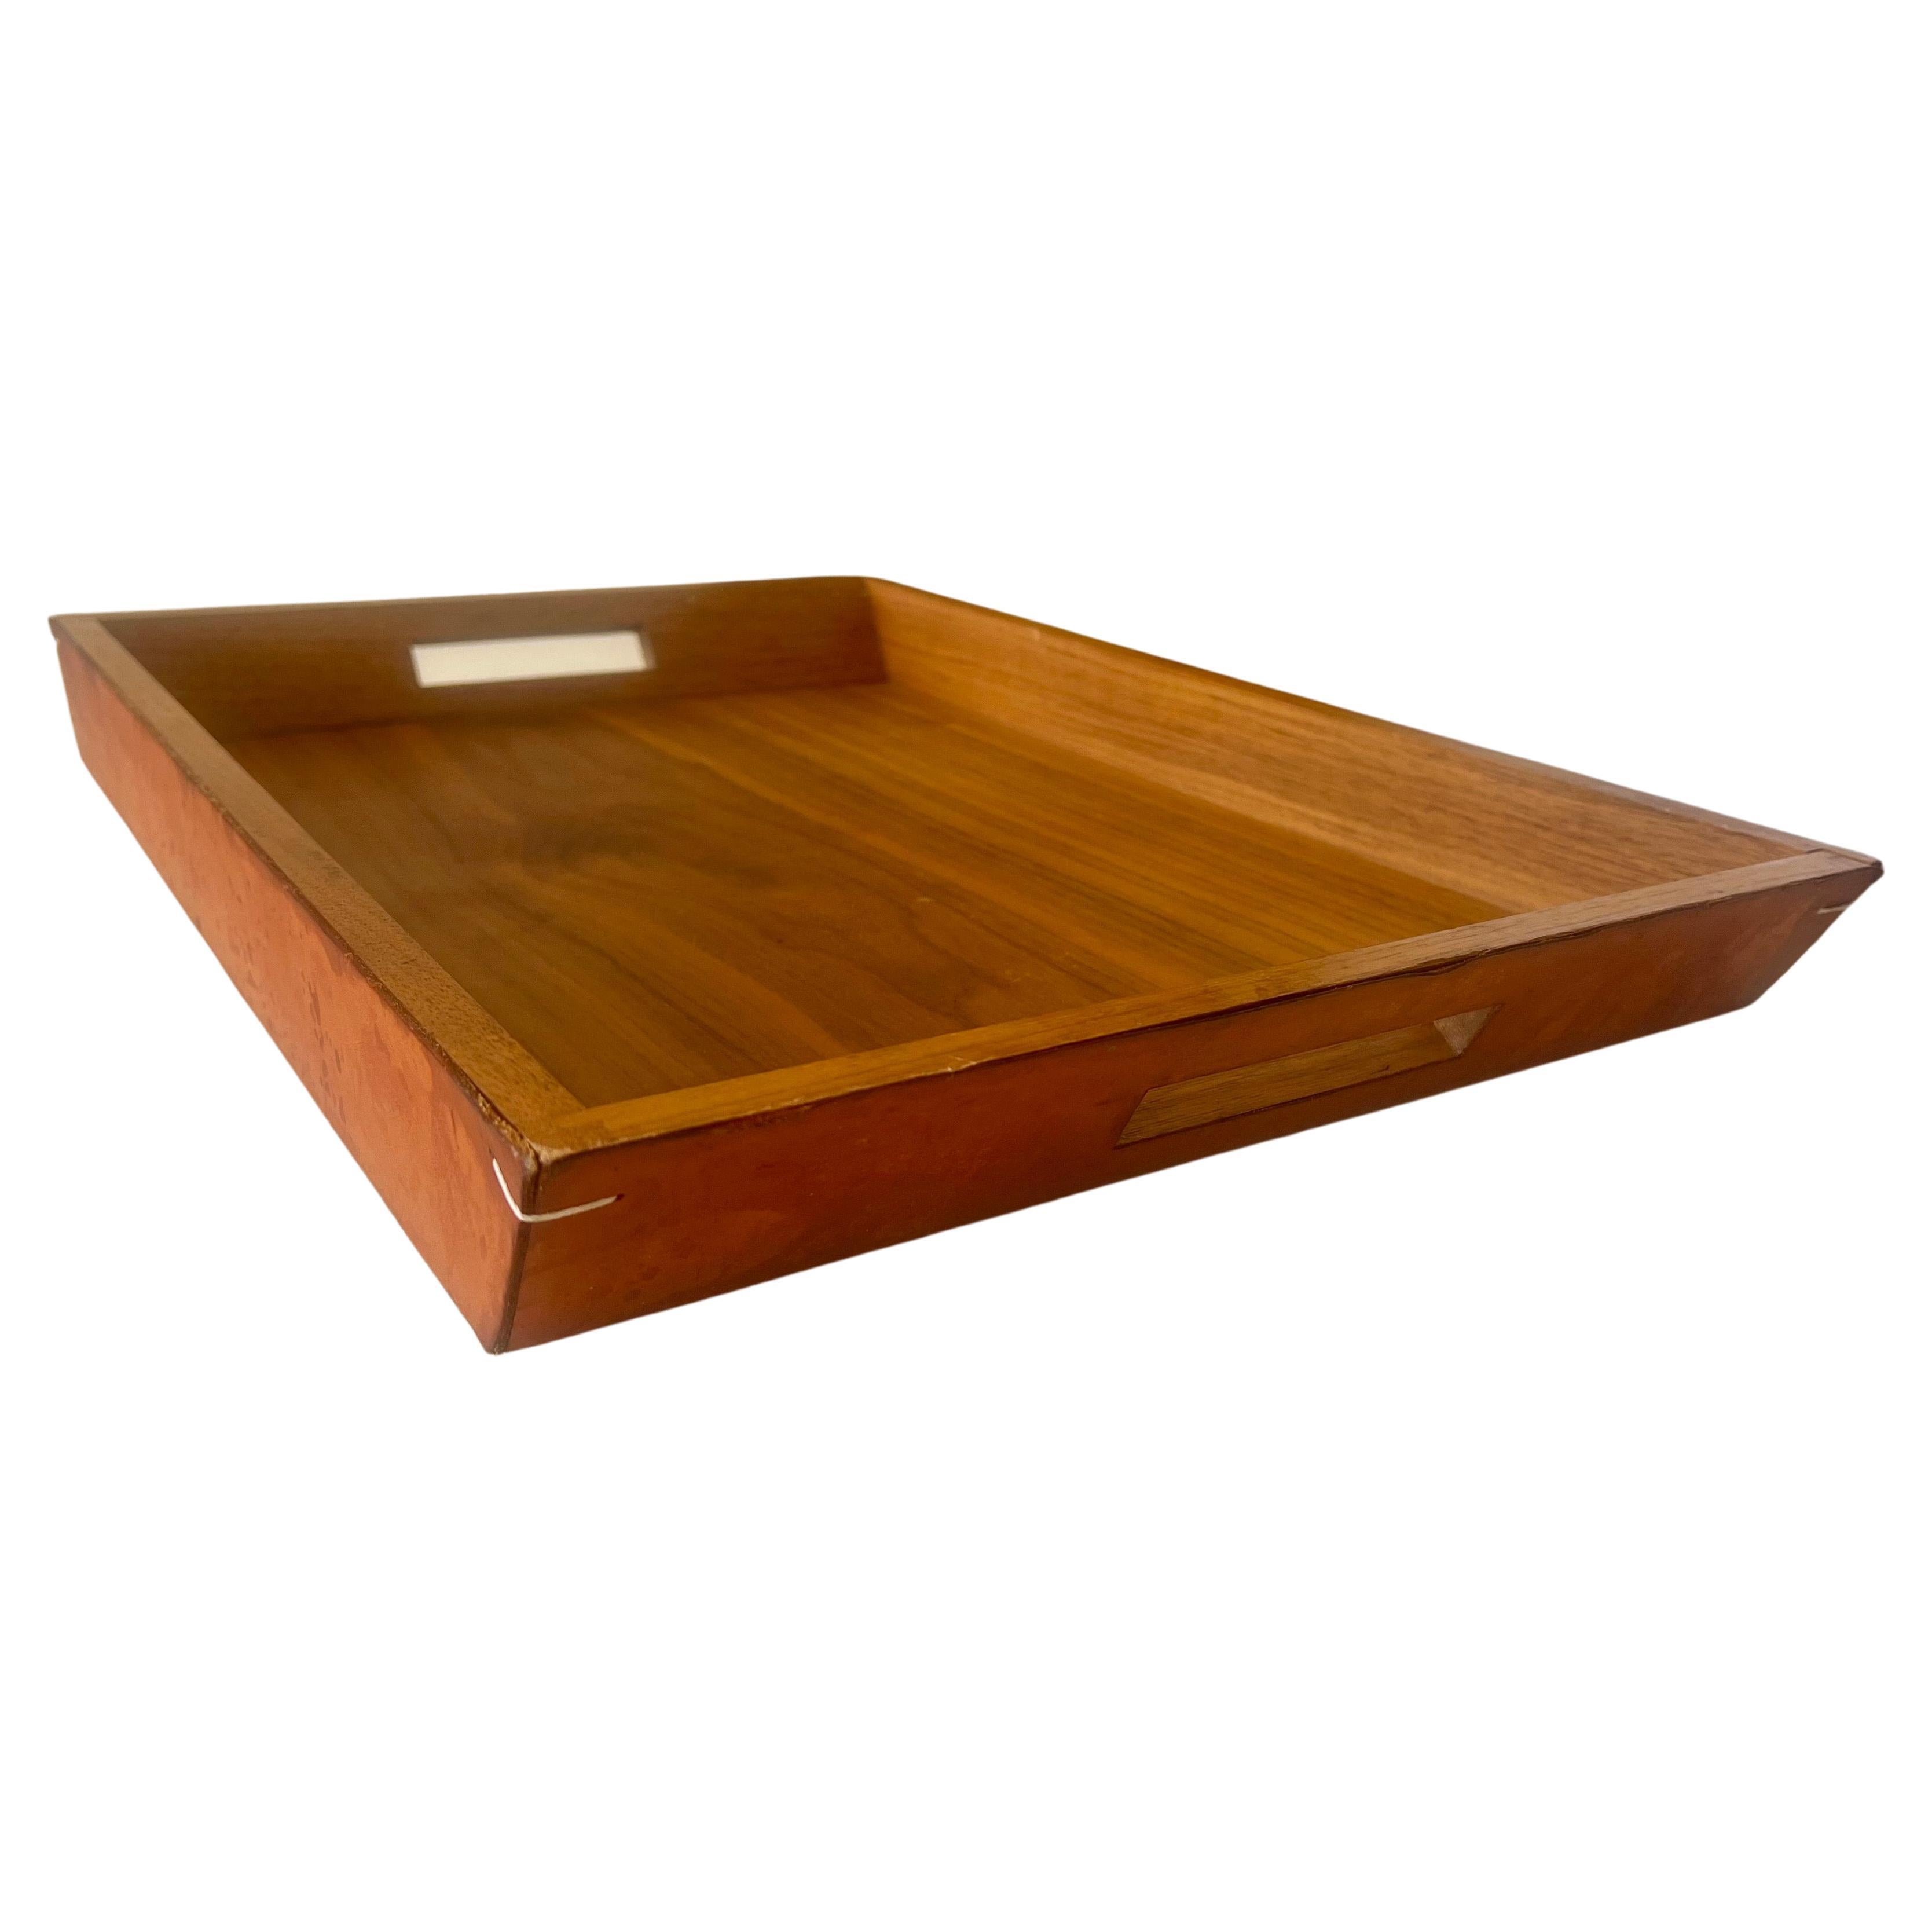 Postmodern Italian Leather & Walnut Serving Tray by Arte & Cuoio For Sale